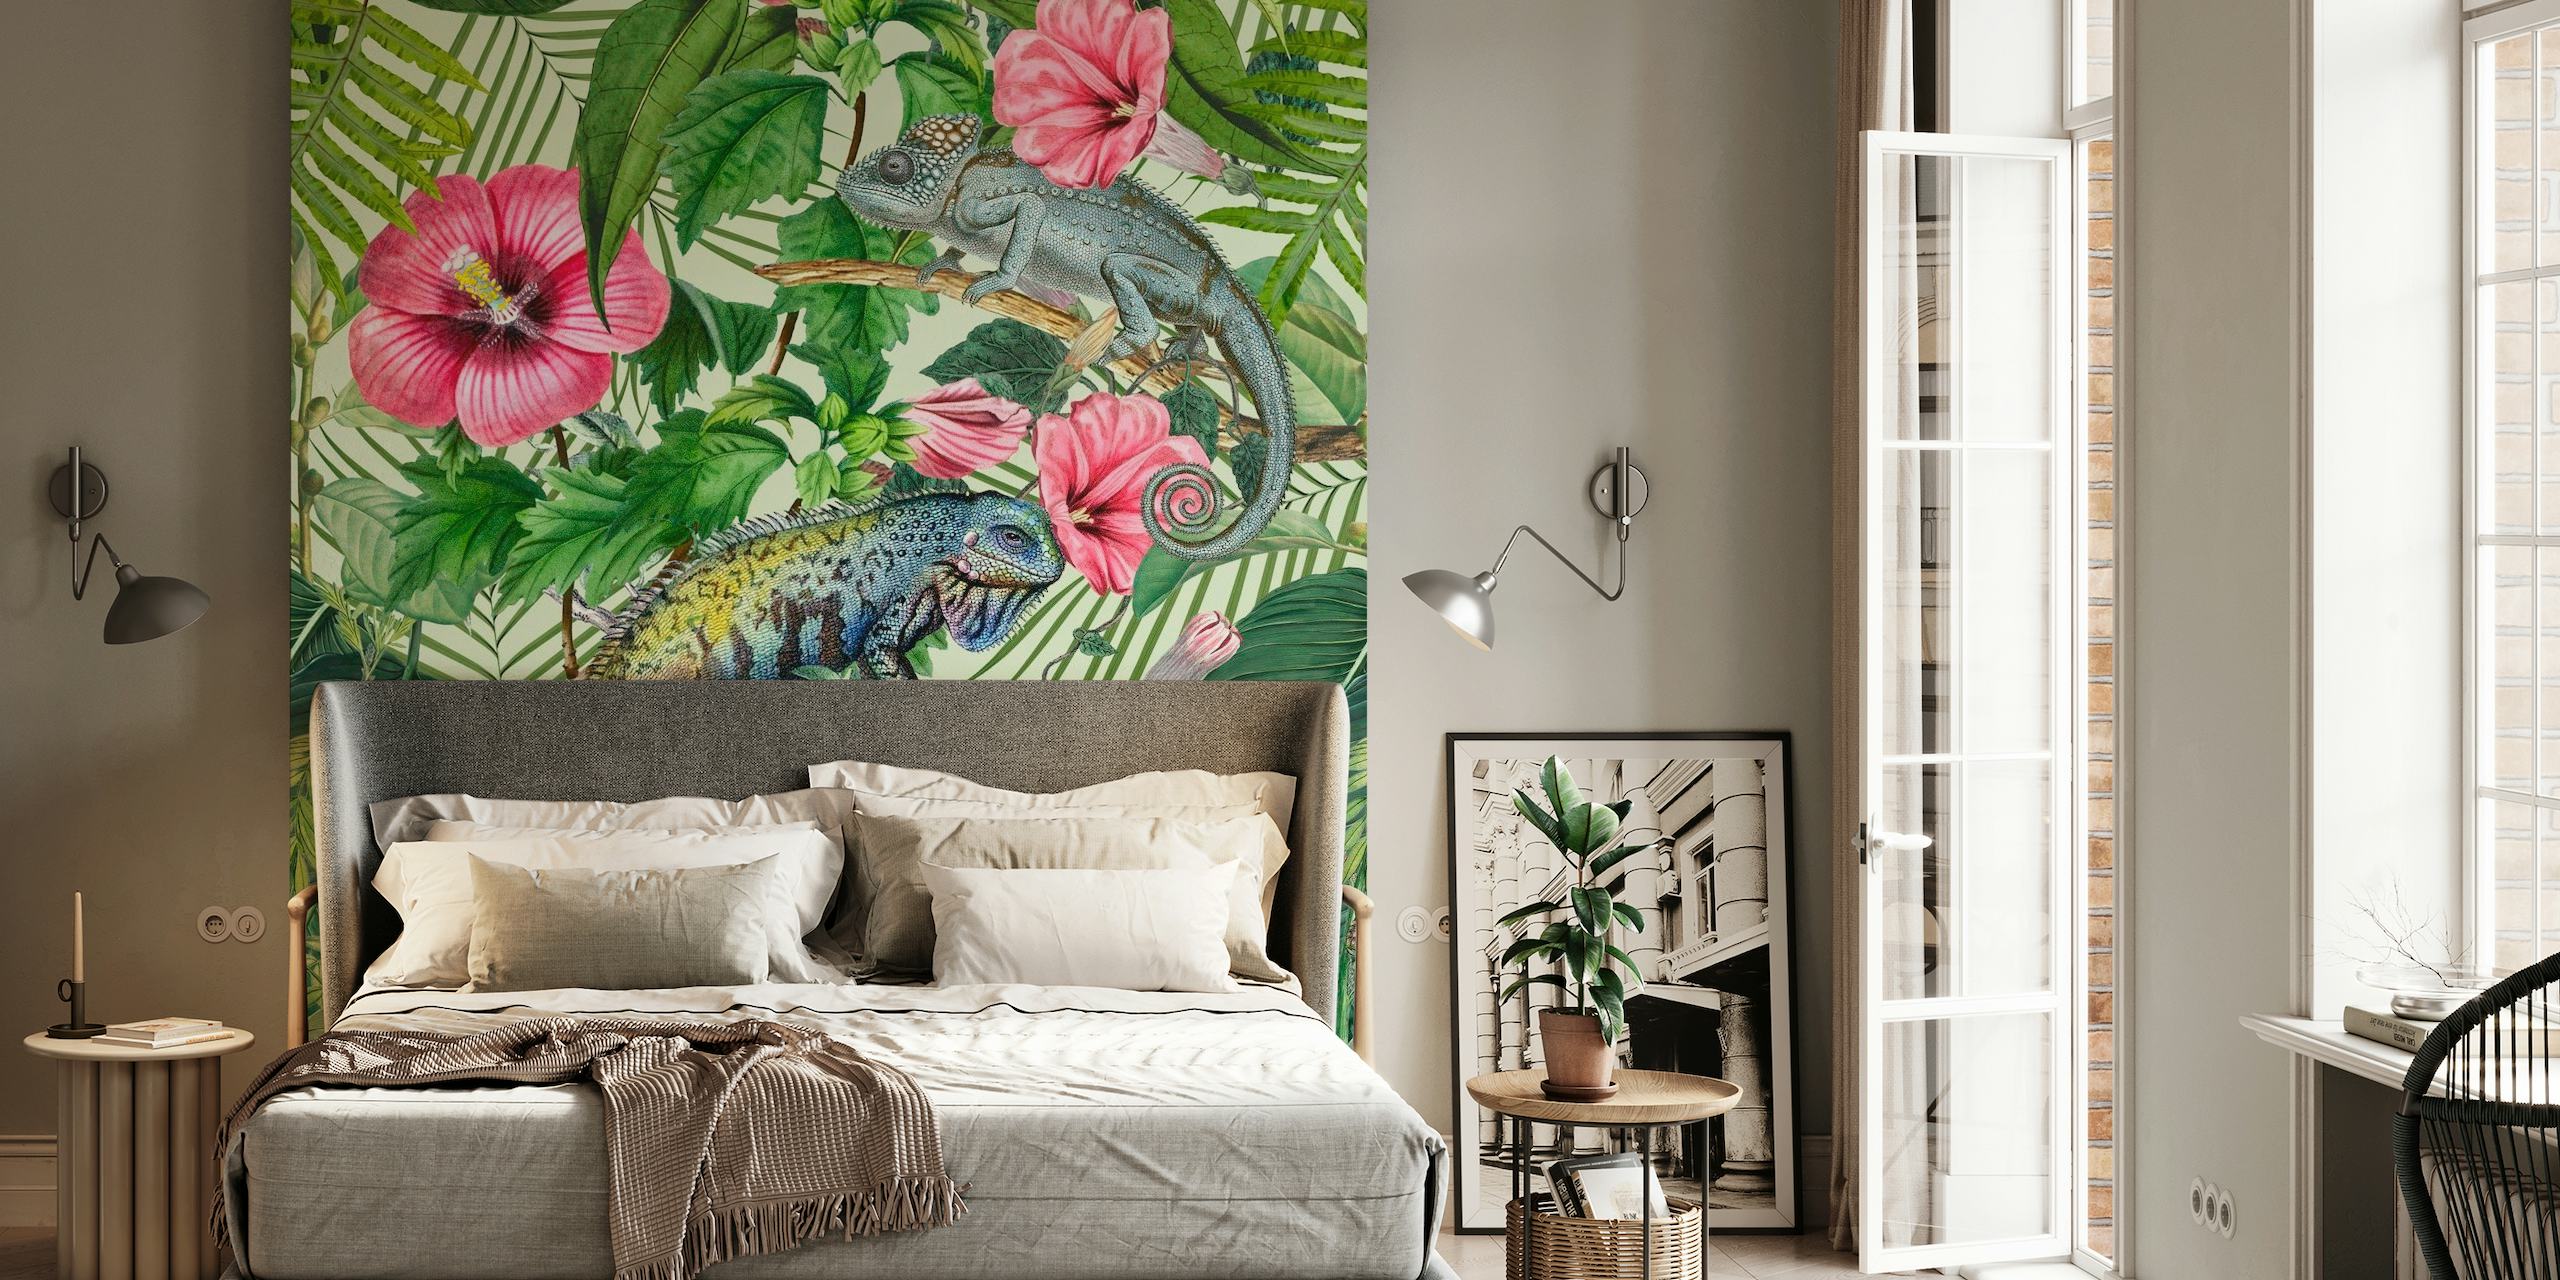 Wall mural with iguanas nestled among tropical green leaves and pink hibiscus flowers